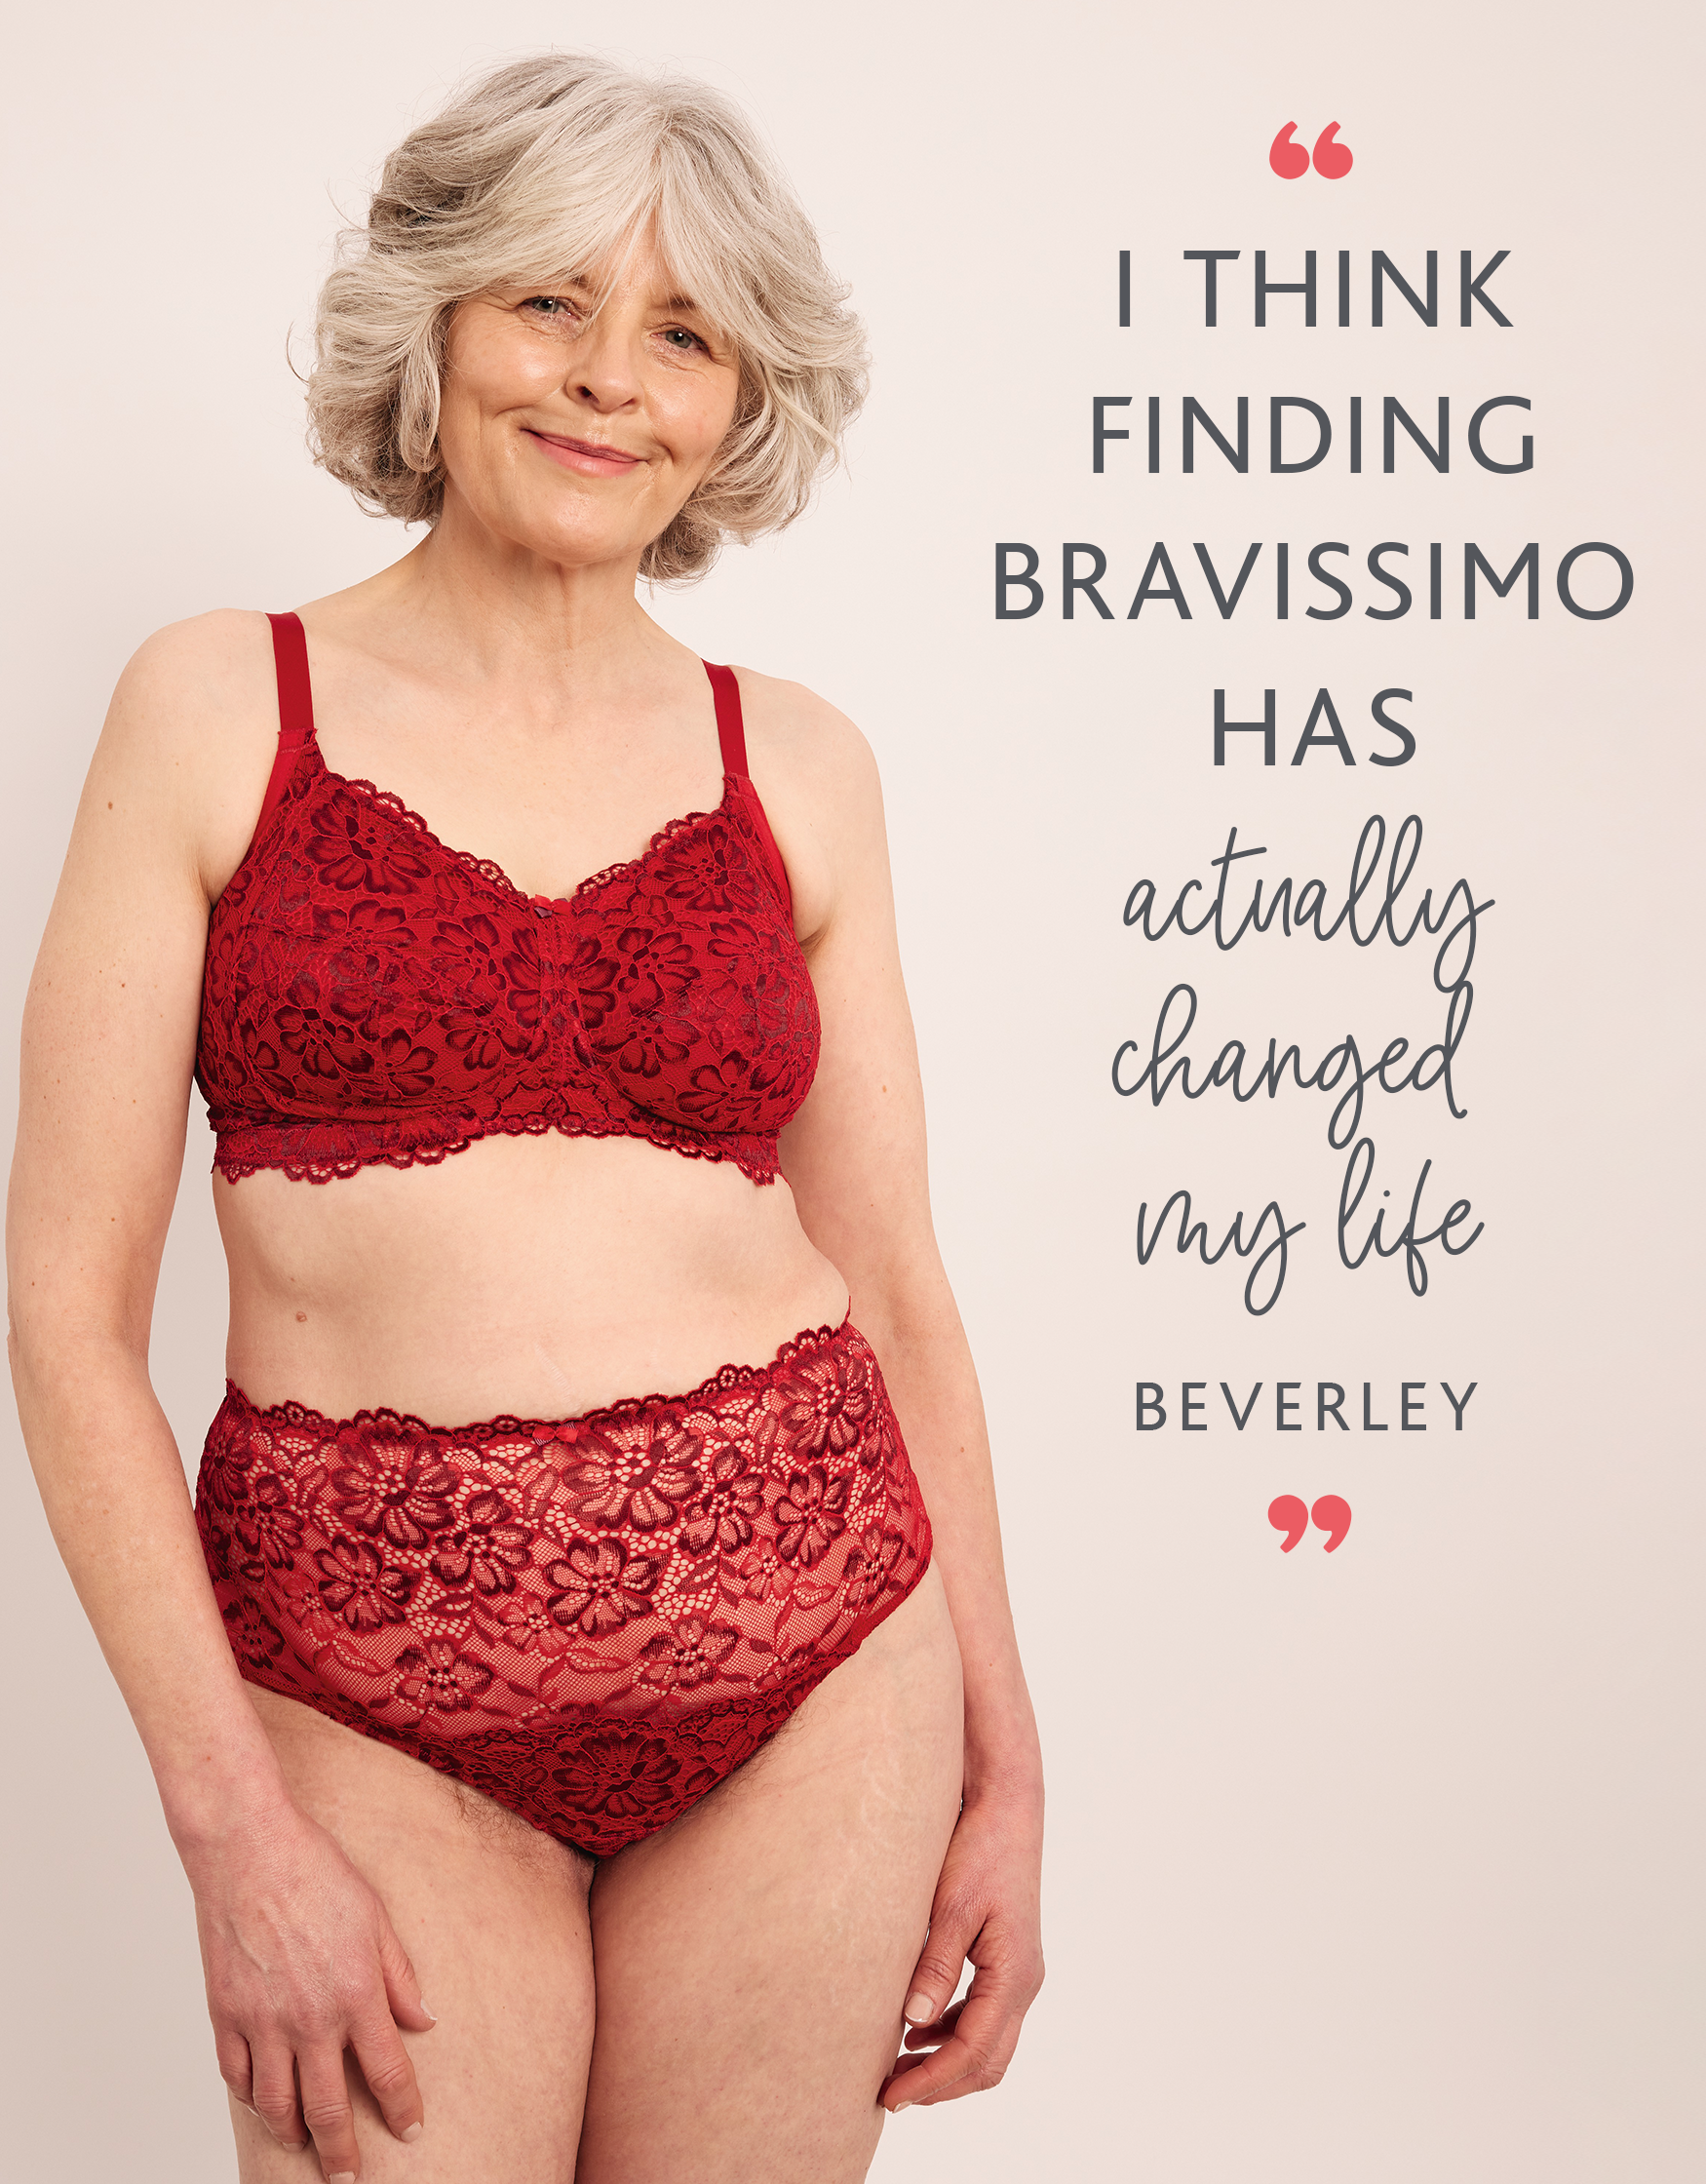 Bravissimo - Bra-drobe bingo! ✨ How many of these Bravissimo staples do you  have in your bra-drobe? Hands up if you've got a full house! 🙋‍♀️